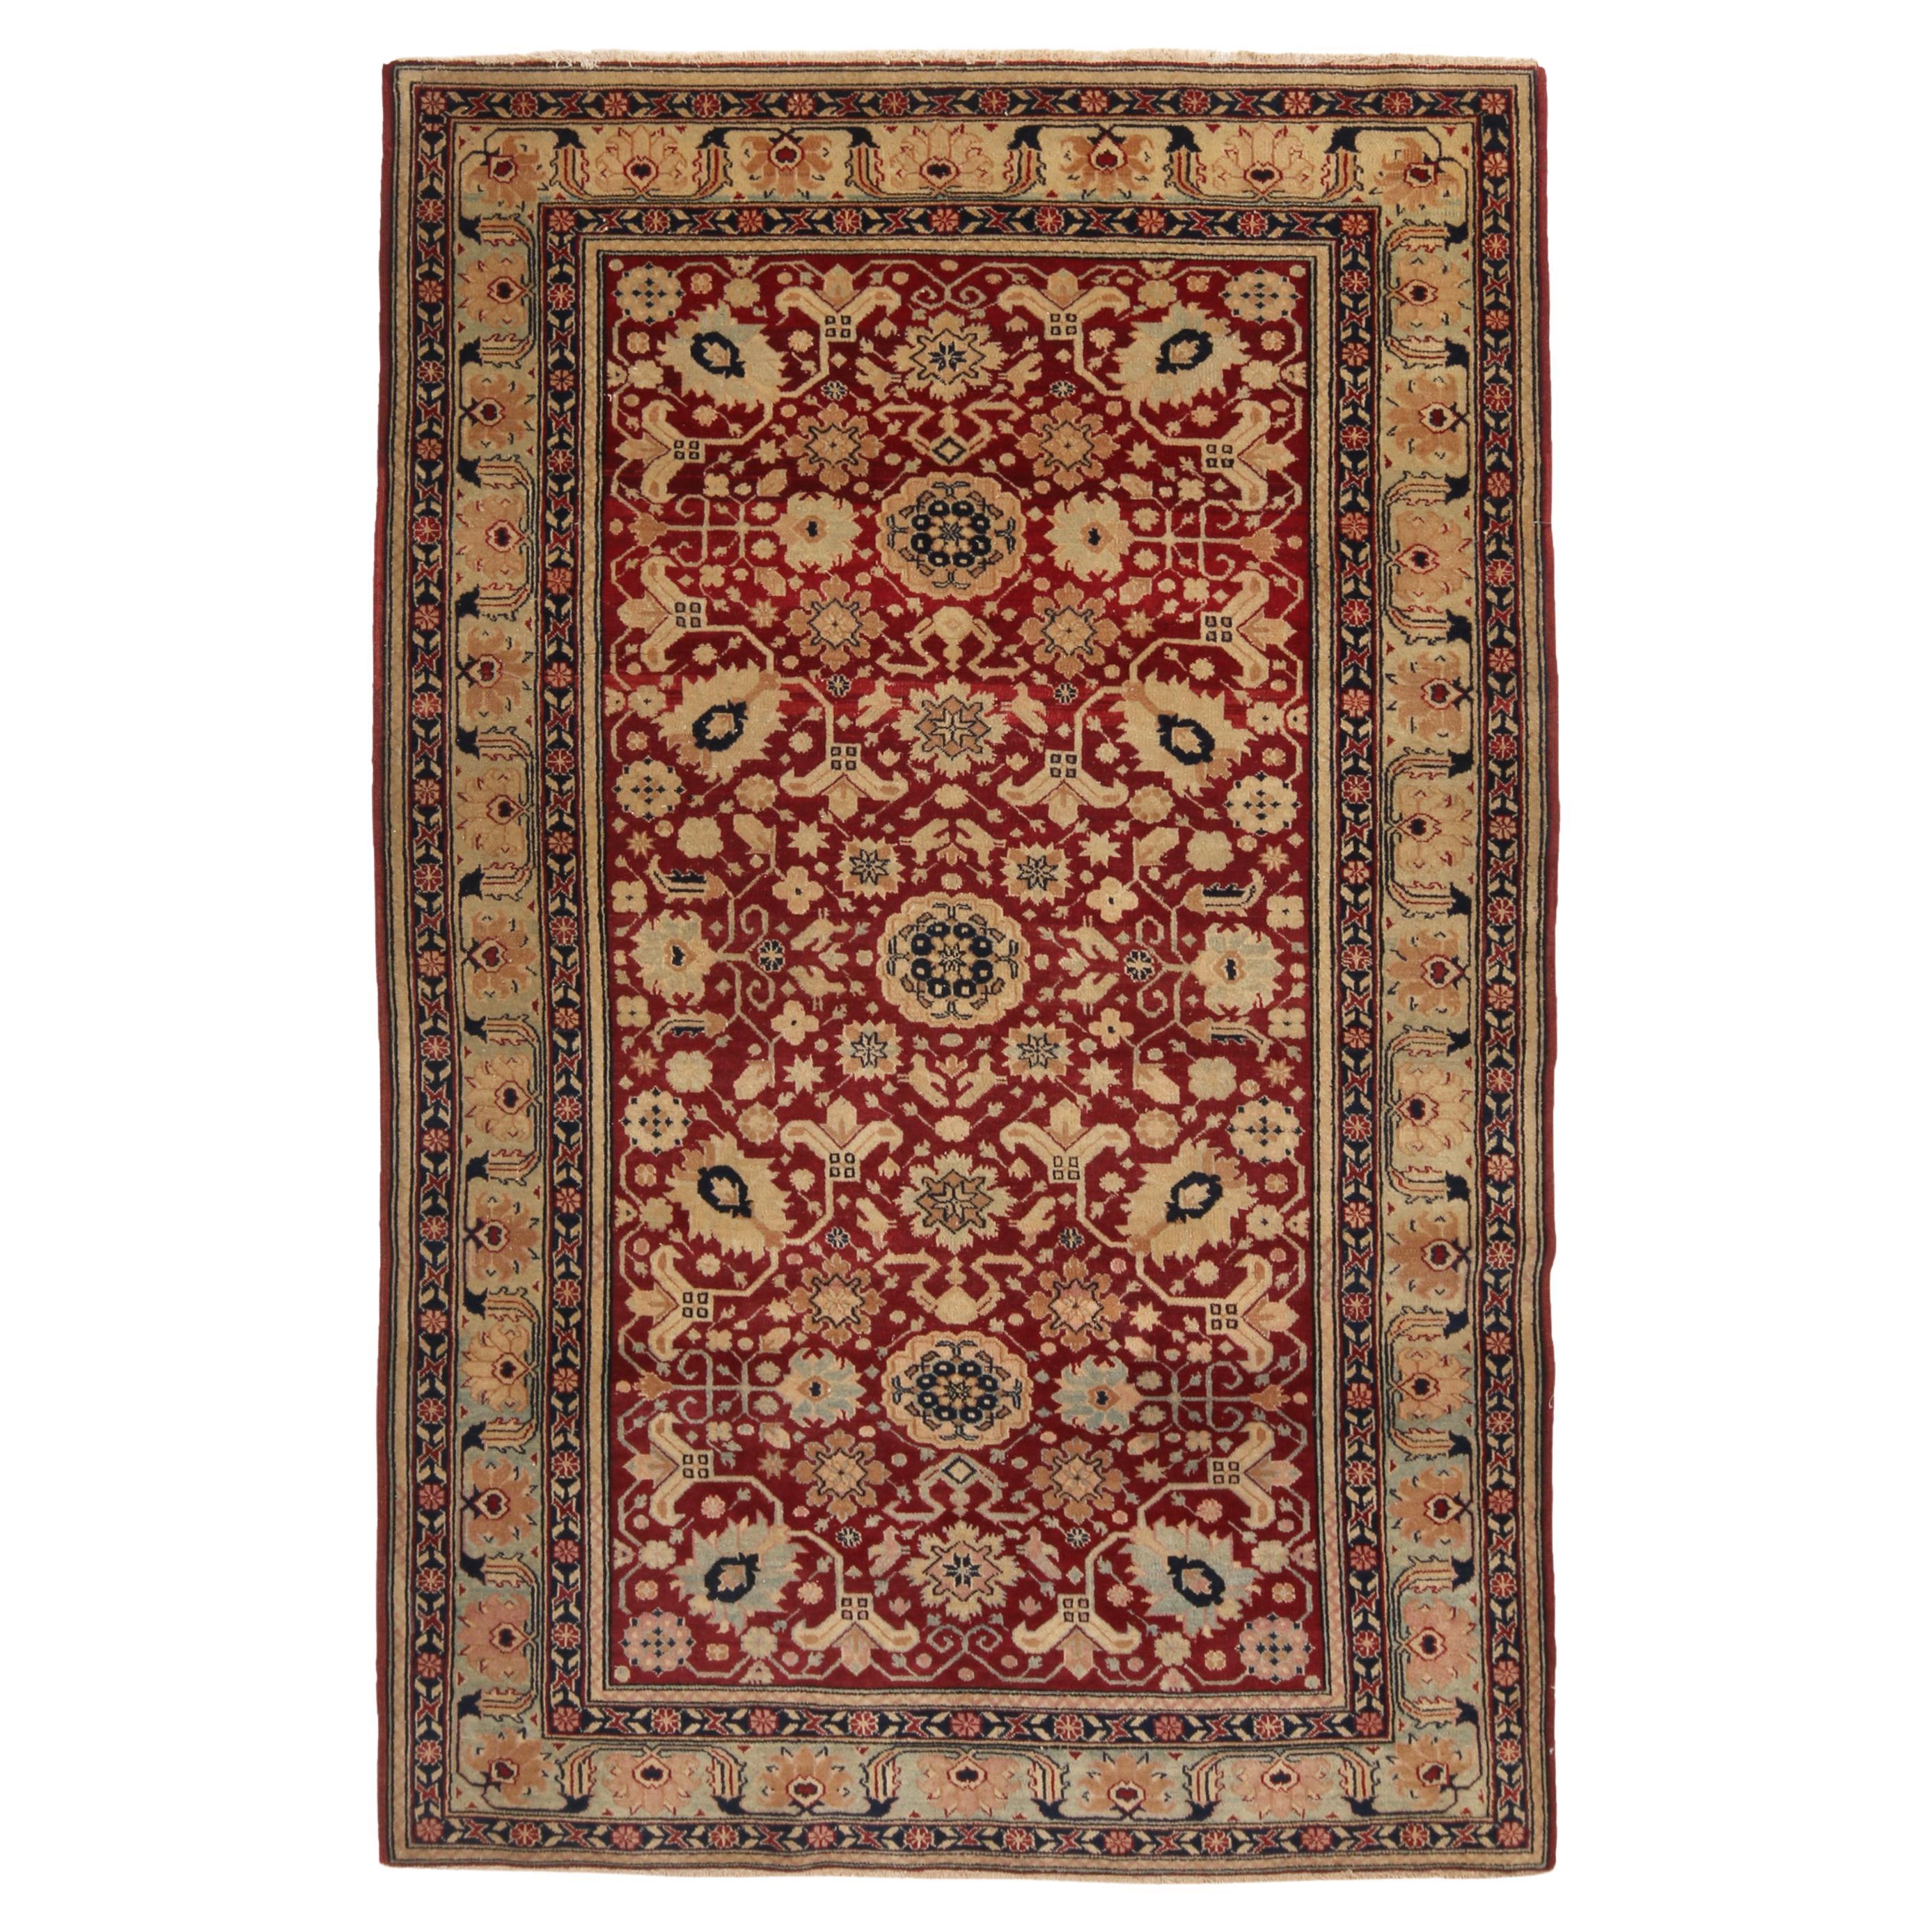 Antique Agra Red Green and Beige-Gold Geometric-Floral Wool Rug by Rug & Kilim For Sale